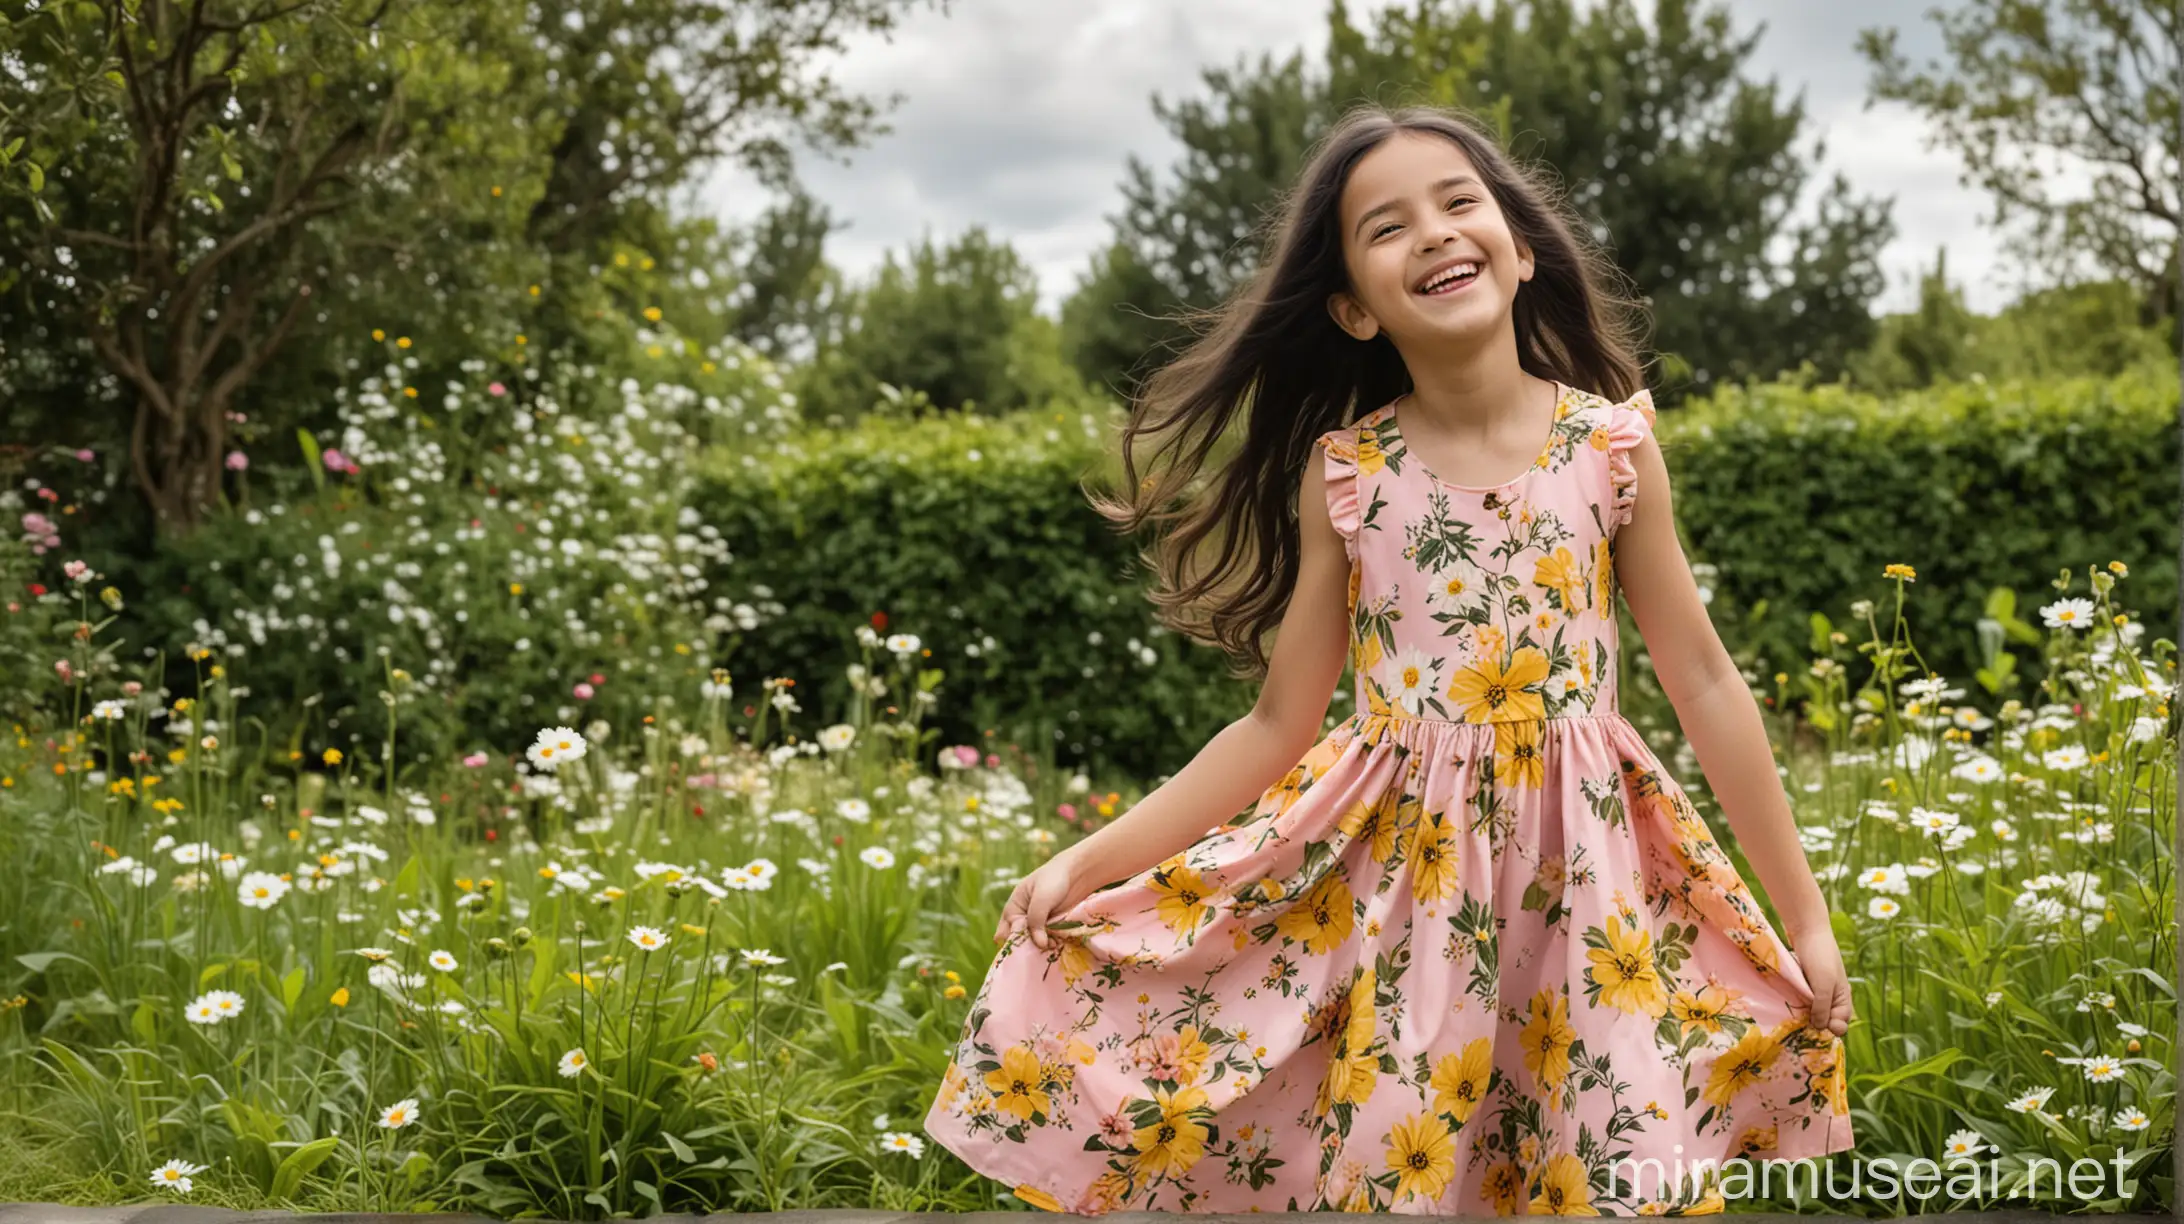 cute looking 9-year-old girl (not wearing glasses or spectacles) wearing nice light-pink coloured frock with yellow and white coloured flowers printed on the frock, with open and long black hair, outside in a garden with green grass and bushes, enjoying the fresh air outside, smiling and laughing happily, with the sky having few clouds and there is nice amount of sunlight, few flowers around her.